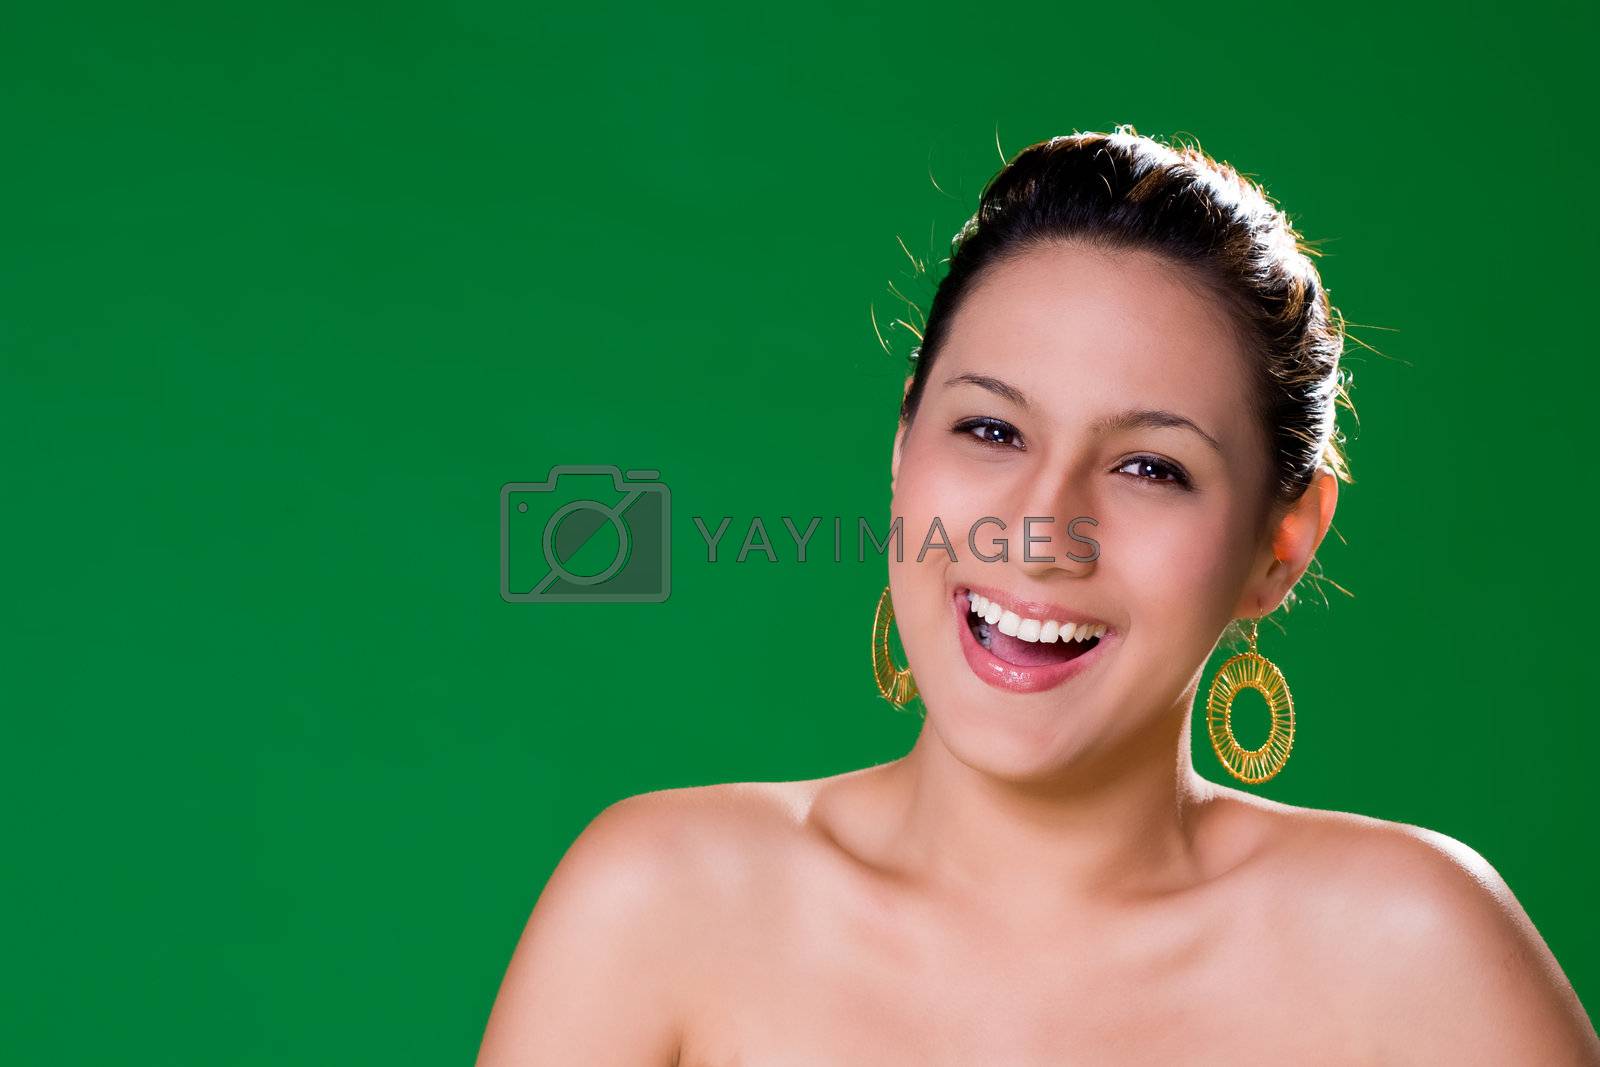 Royalty free image of beautiful natural big smile by eyedear